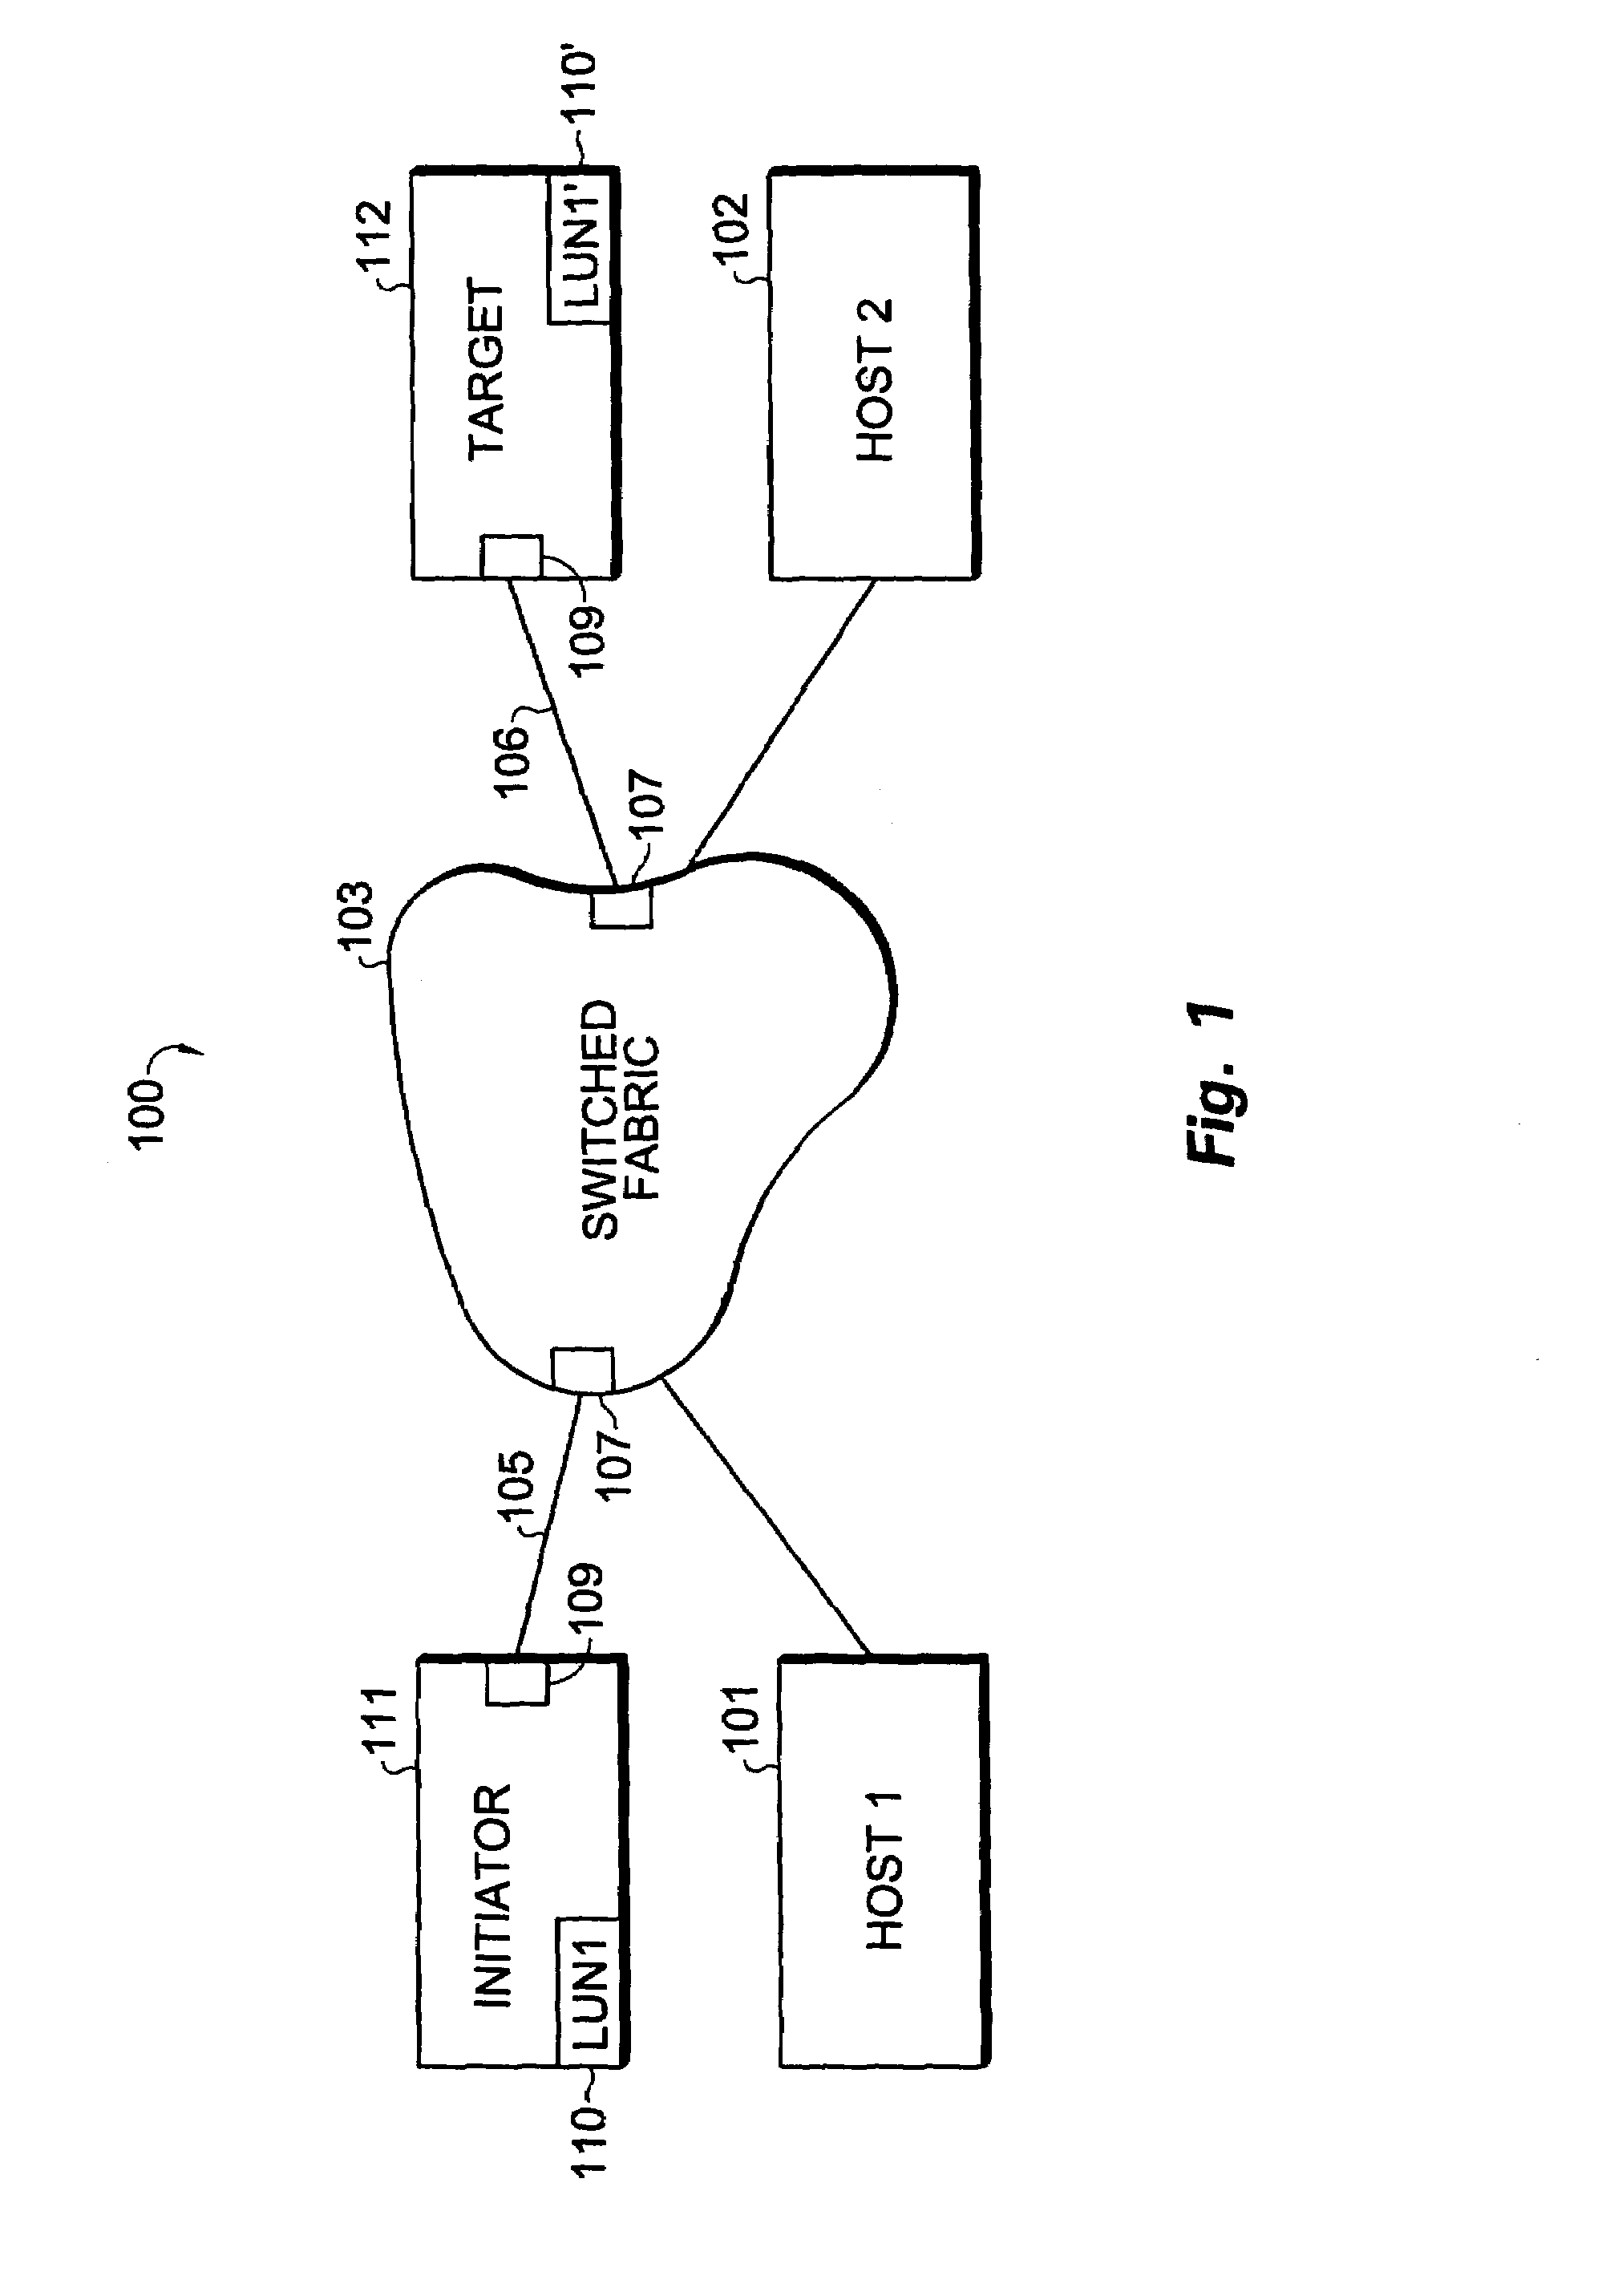 Controller-based remote copy system with logical unit grouping